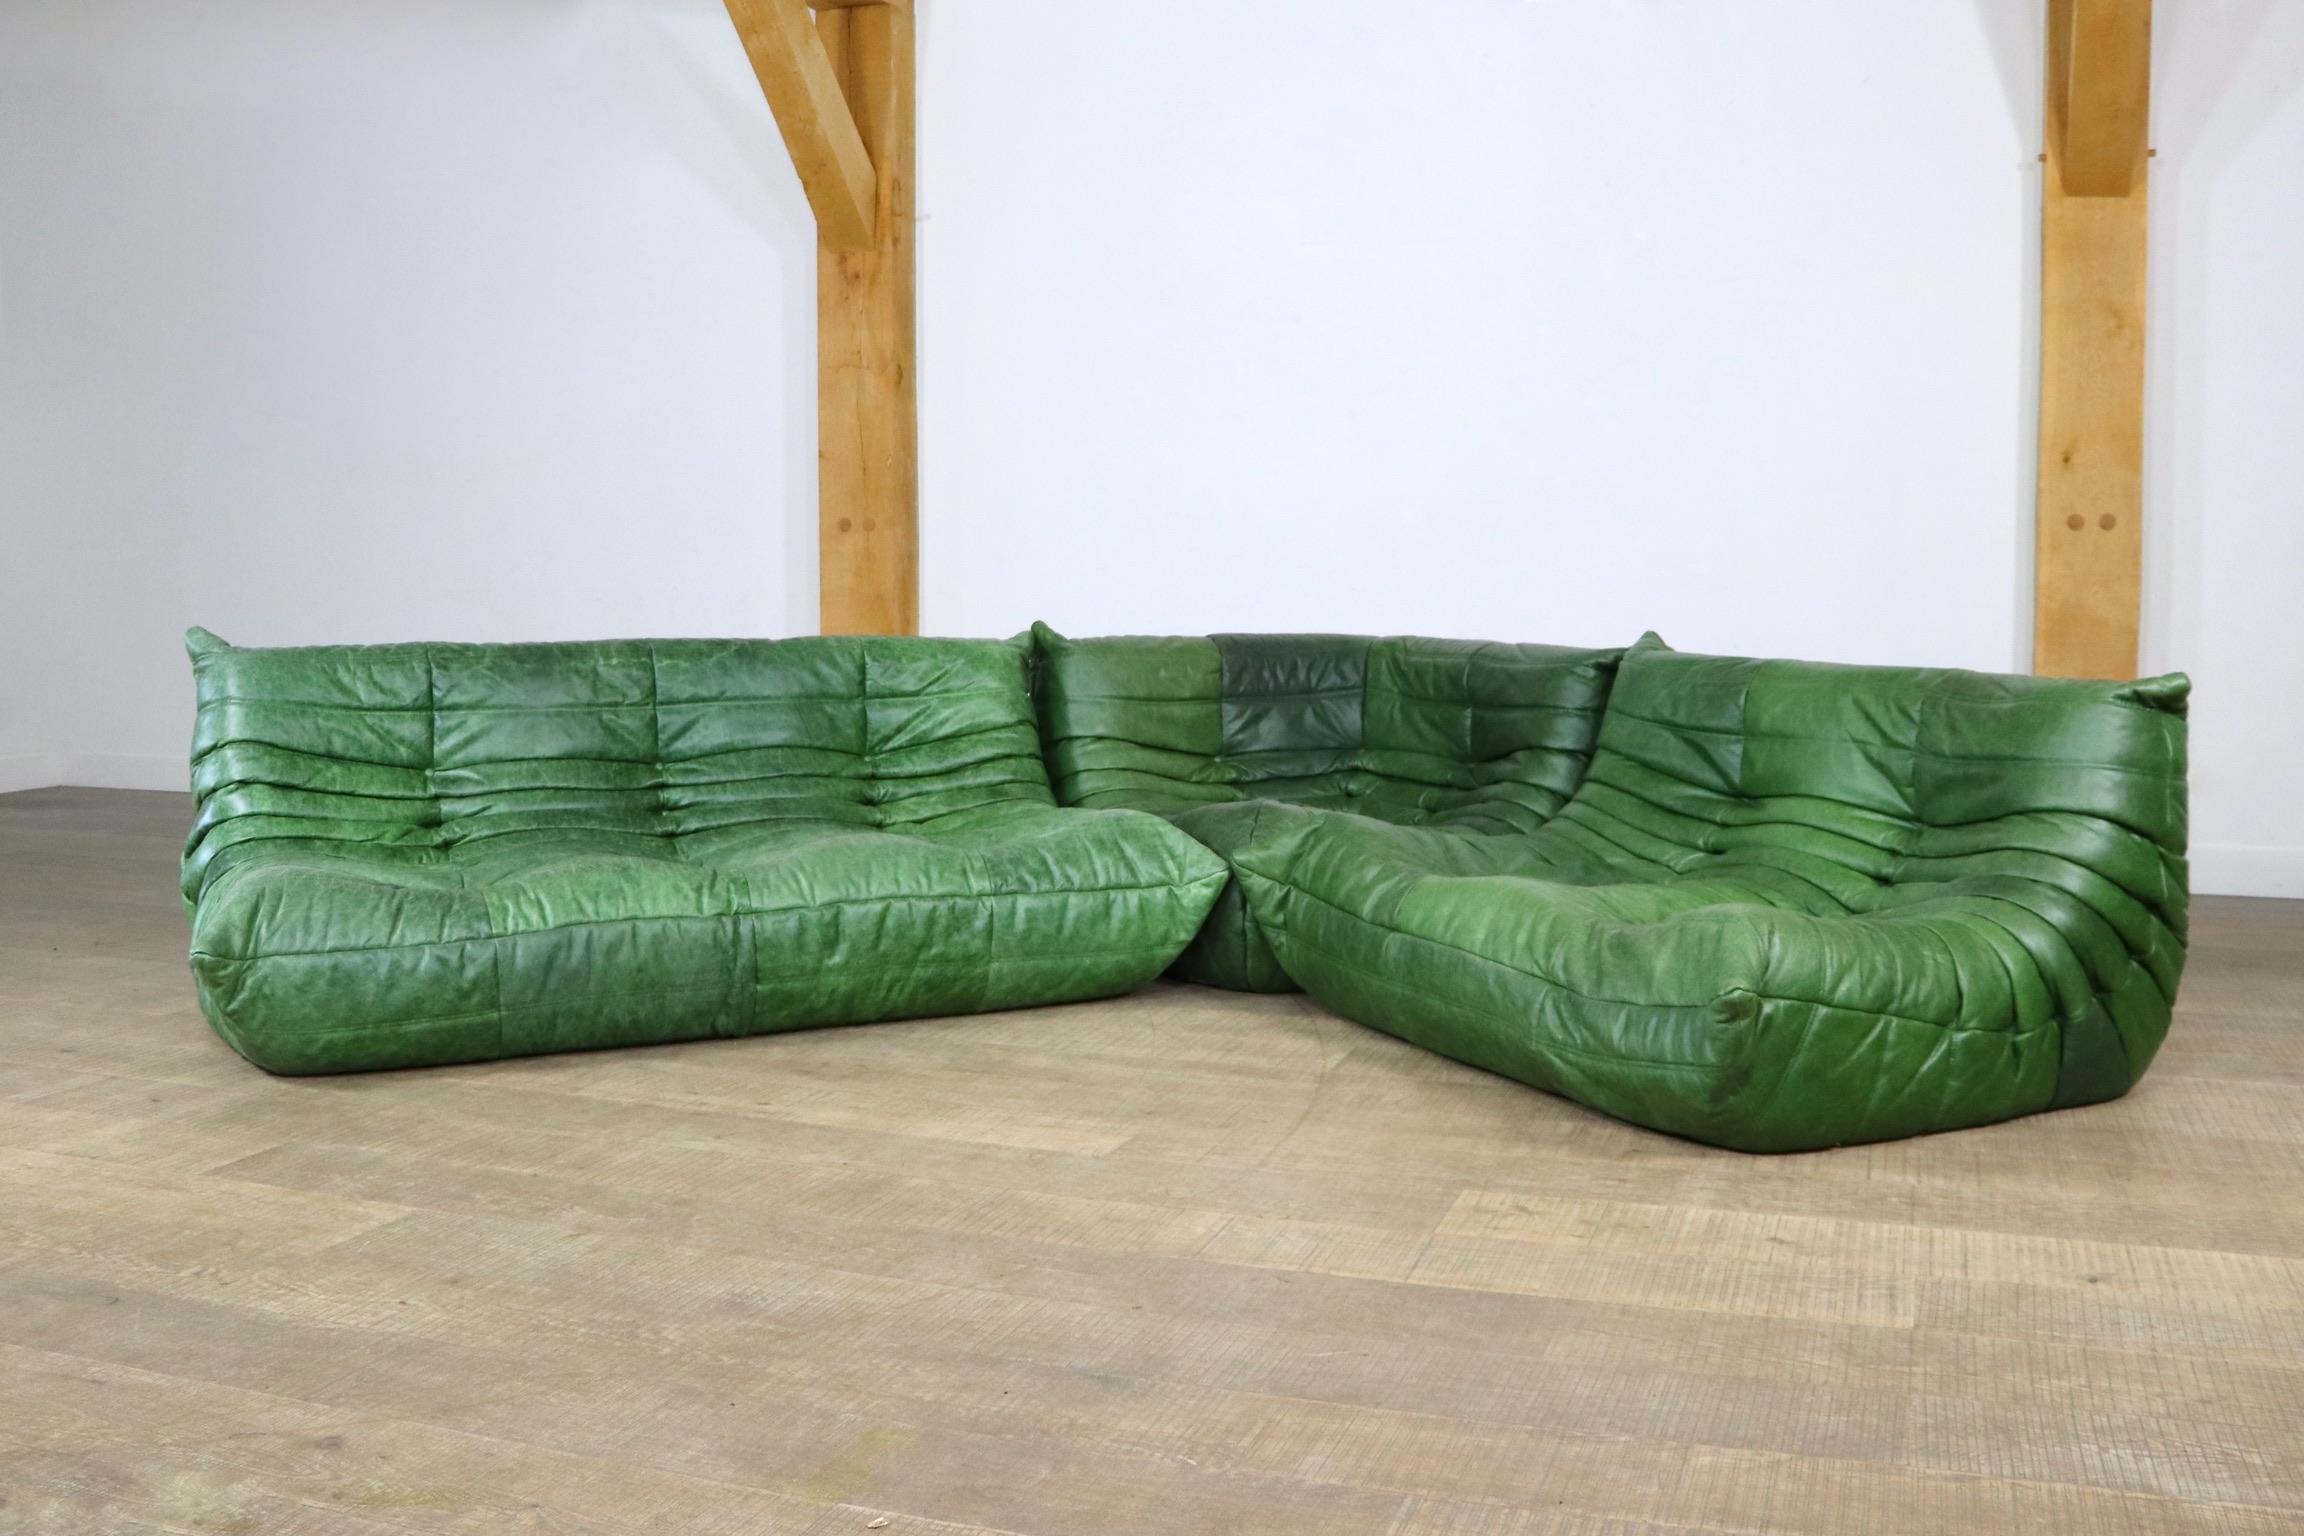 Beautiful original green leather Togo seating group by Michel Ducaroy for Ligne Roset, 1970s. The whole seating group still has the original vintage Ligne Roset logo. The set consists of a 2-seater, a 3-seater and a corner element. This incredible